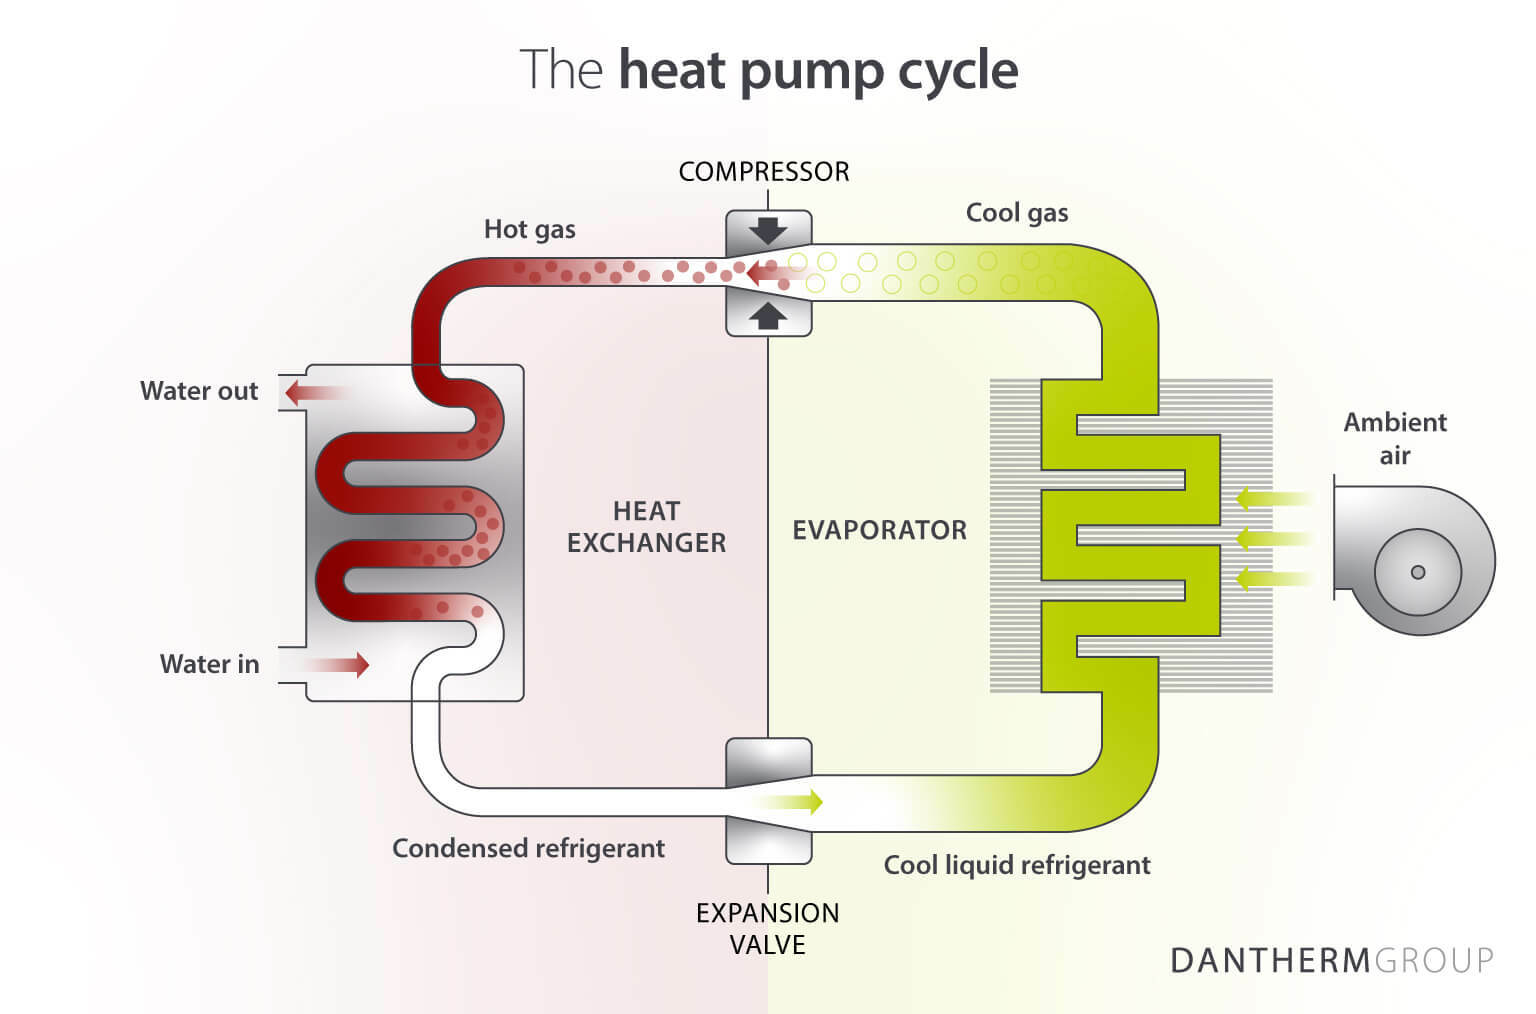 The heat pump cycle - showing how swimming pool heat pumps work